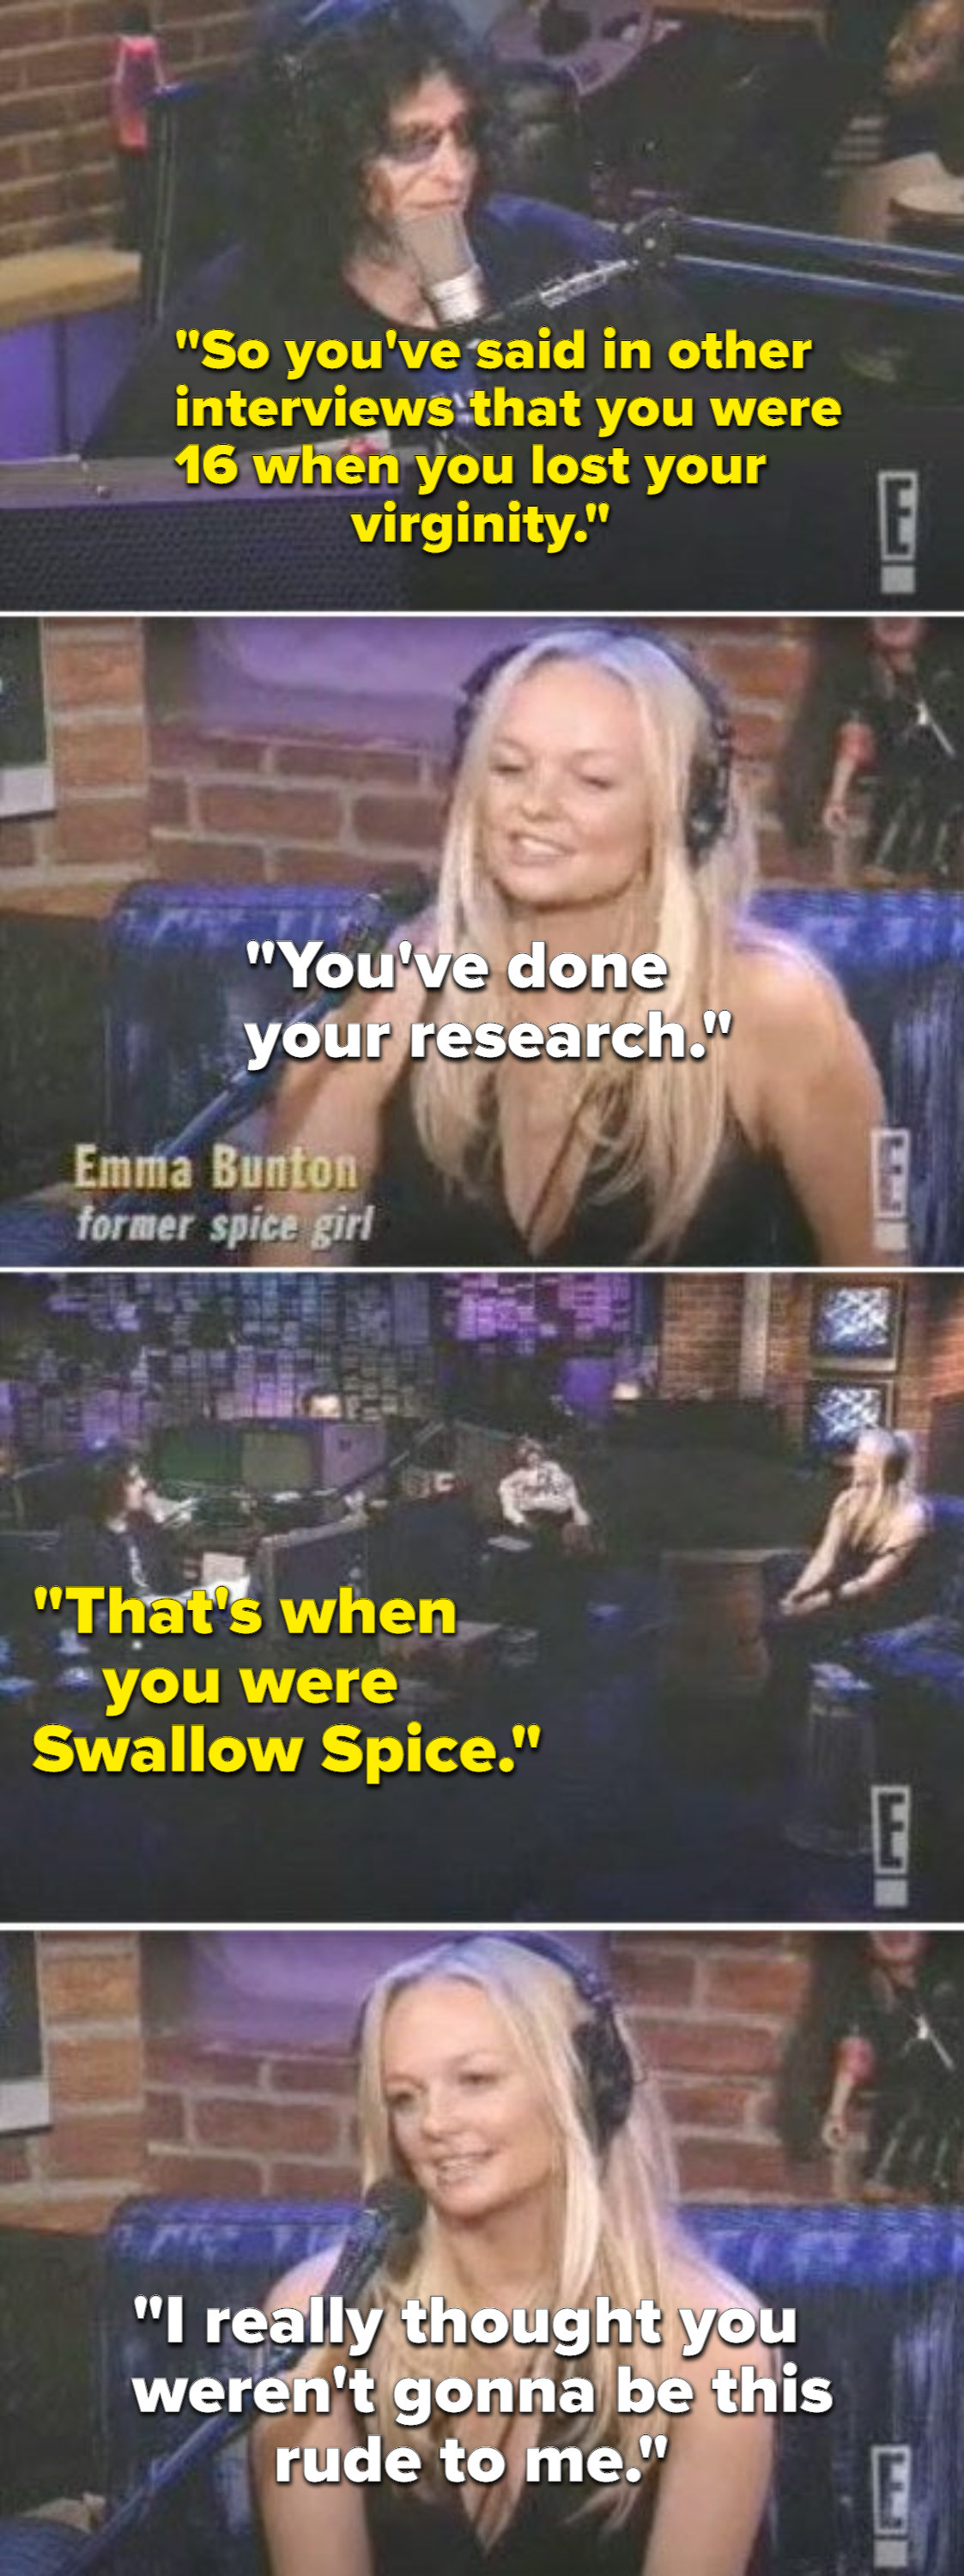 Howard Stern saying that Emma lost her virginity when she was &quot;Swallow Spice&quot;